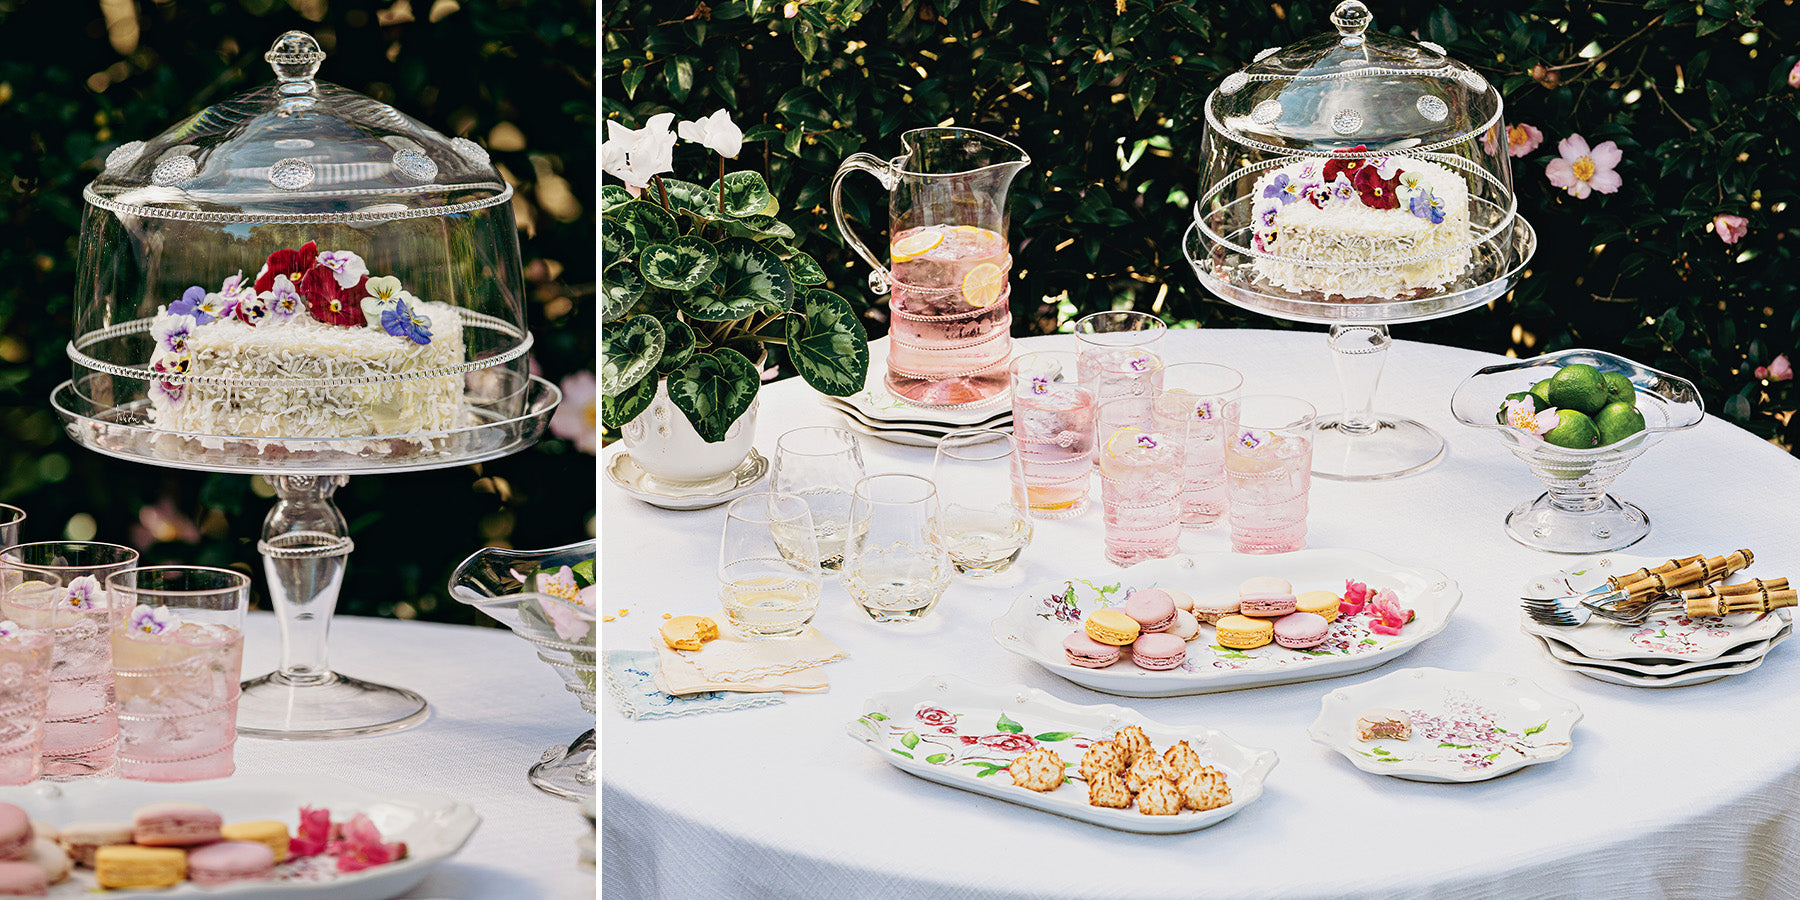 An outdoor table set up with cocktails and cake.